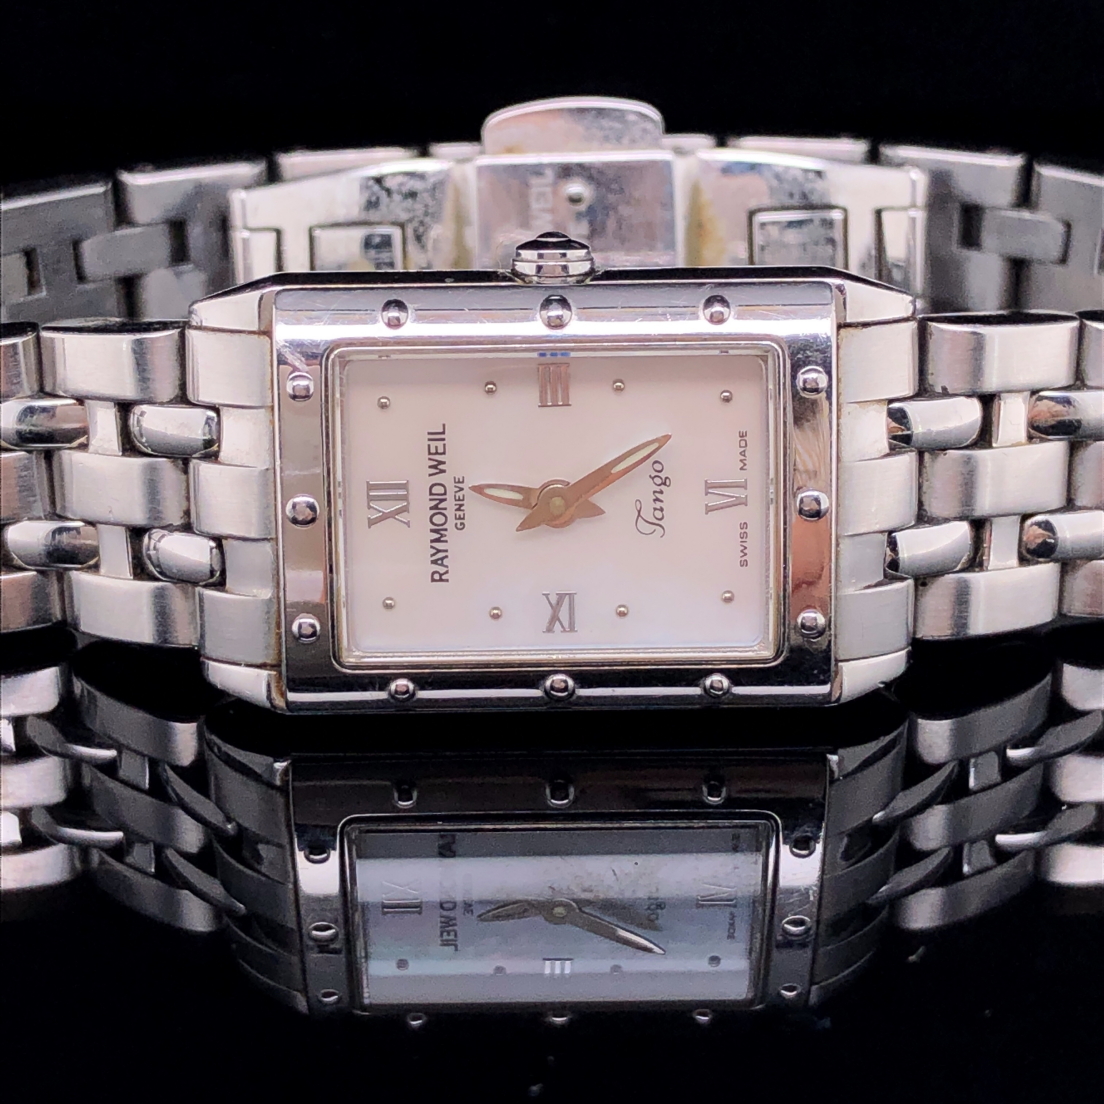 A LADIES RAYMOND WEIL QUARTZ WRIST WATCH, REFERENCE NUMBER 5971. COMPLETE WITH A BI-FOLDING - Image 3 of 4